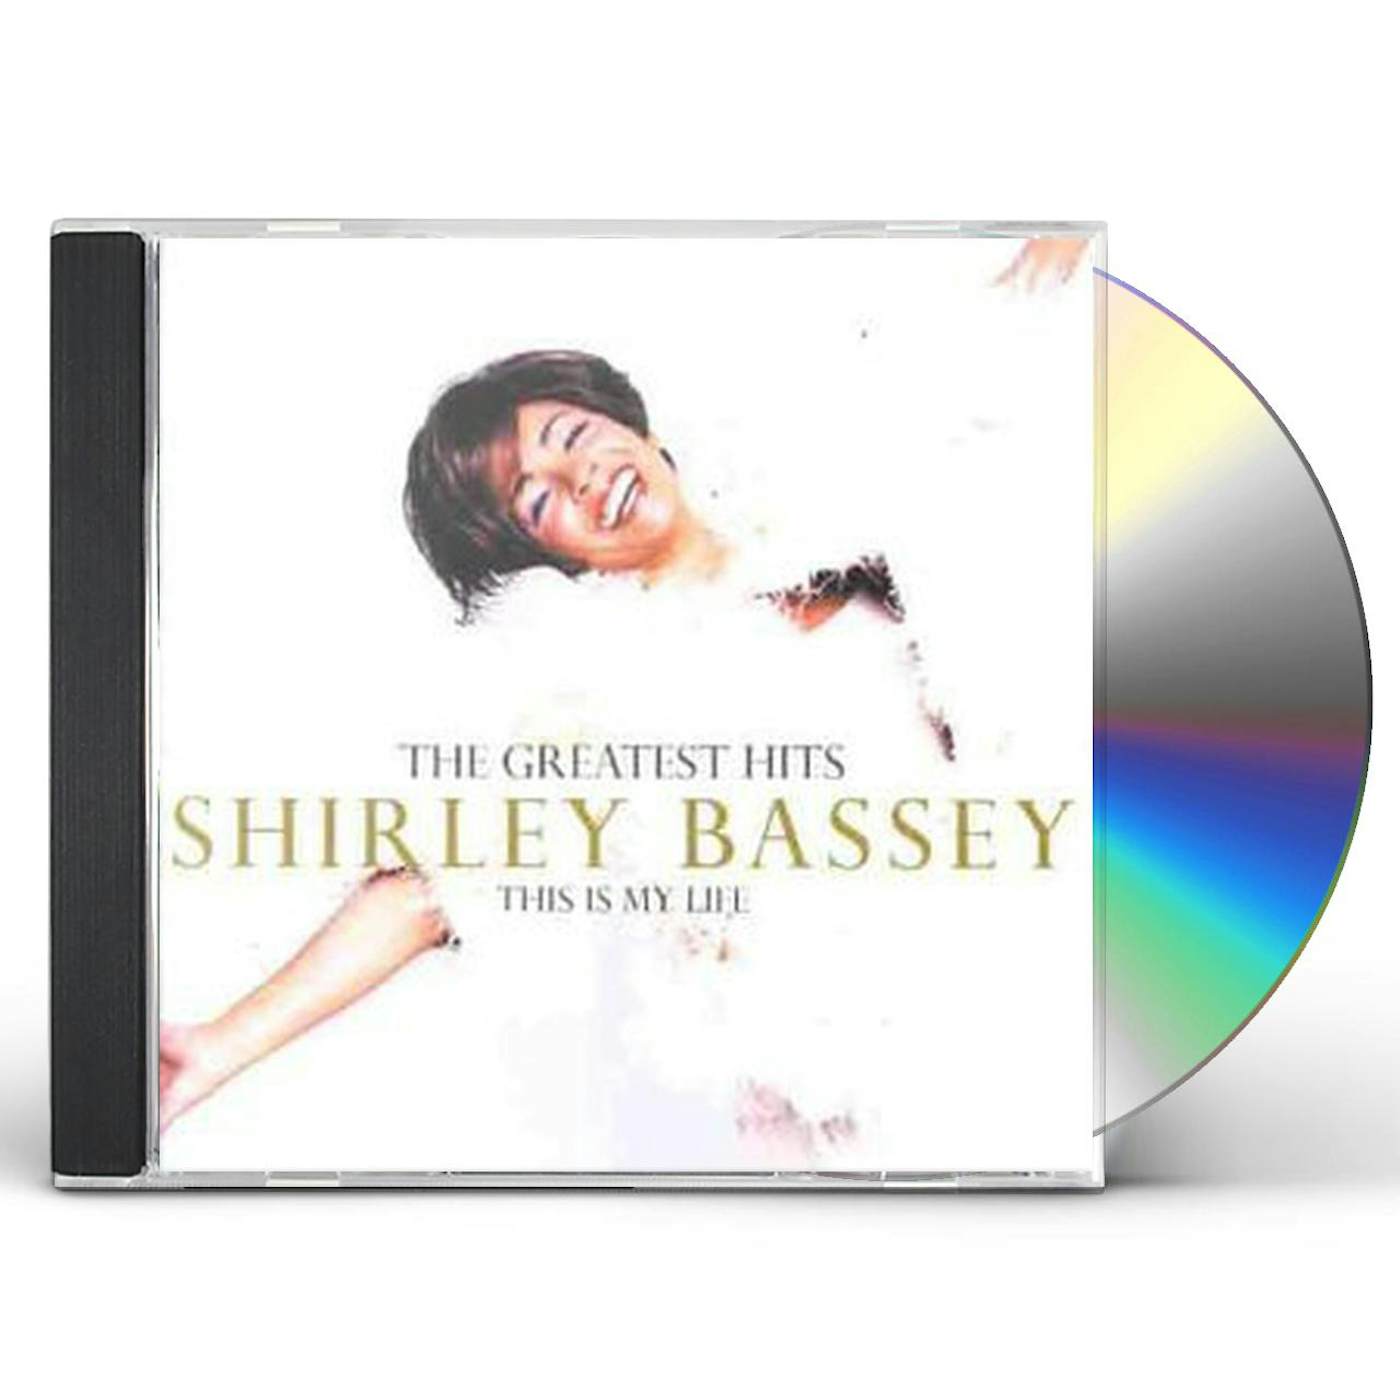 Shirley Bassey THIS IS MY LIFE: GREATEST HITS CD